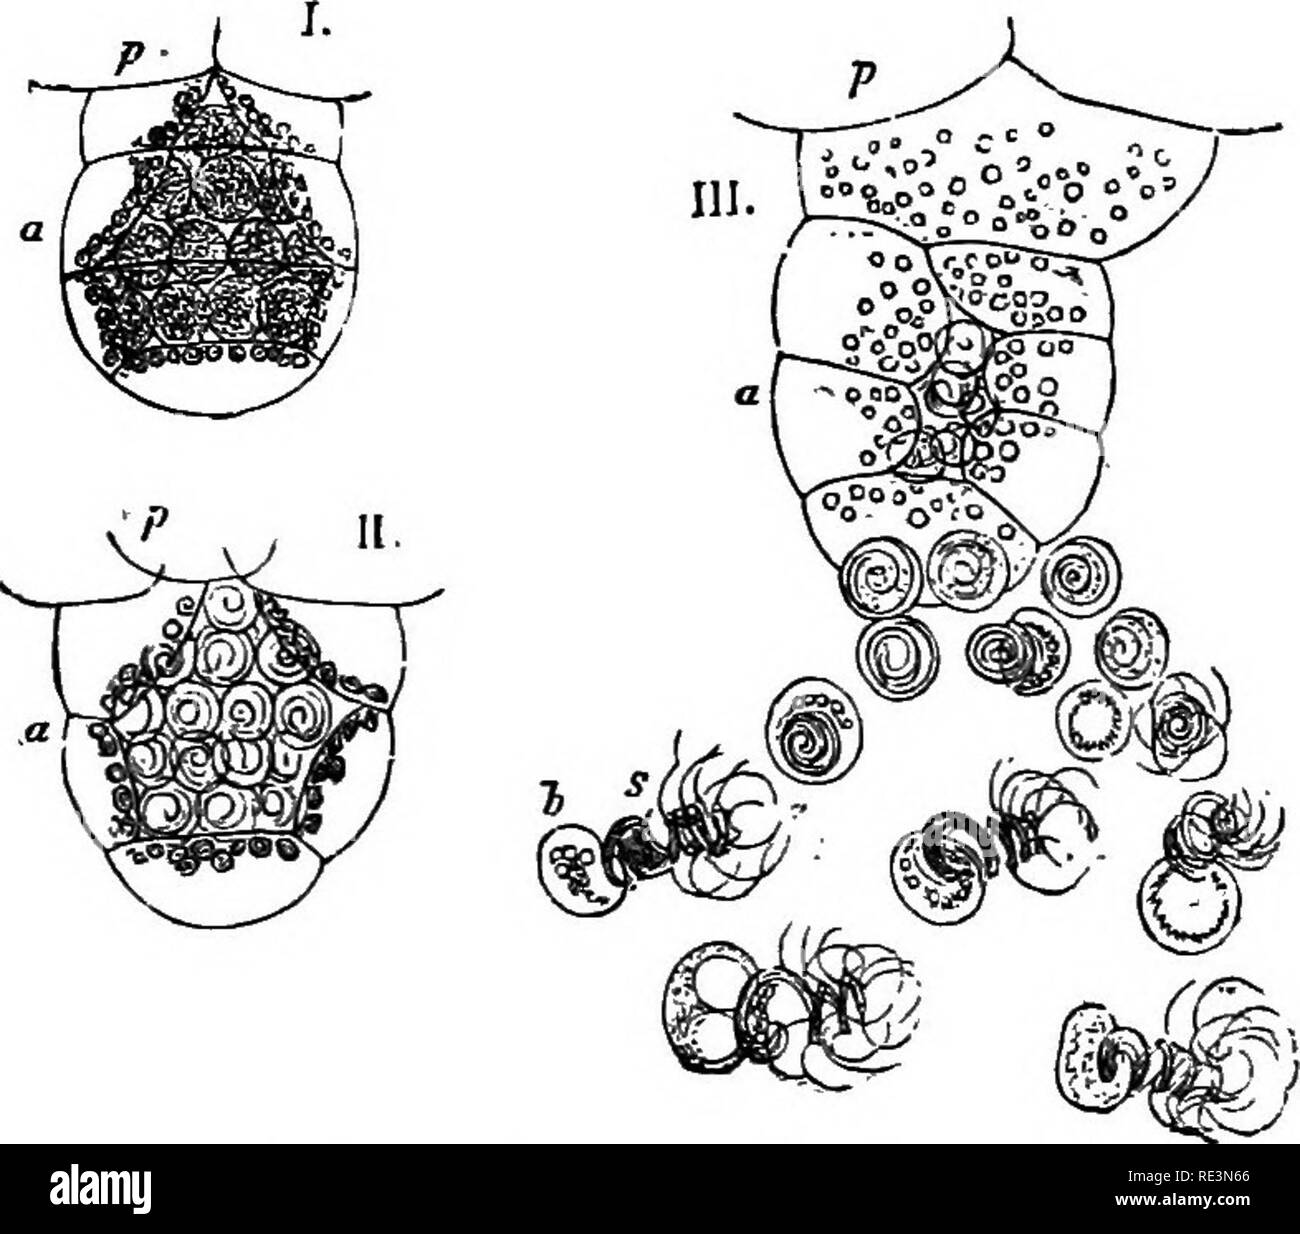 . A handbook of cryptogamic botany. Cryptogams. leptophylla (Desv.) the prothallium is many-lobed, and the archegones and antherids are produced on separate conical tuber-hke outgrowths from its under side, which penetrate into the soil, where they are perennial, and may give birth by budding to new prothallia, while the sporophyte gene- ration is annual. The prothallium is occasionally, in the Hymenophyllacese, reduced to a single row of cells ter- jf *^i^5^^?^S5^9 minating in an antherid, or even to a single cell. Campbell has detected continuity of protoplasm in the cells of the prothallium Stock Photo